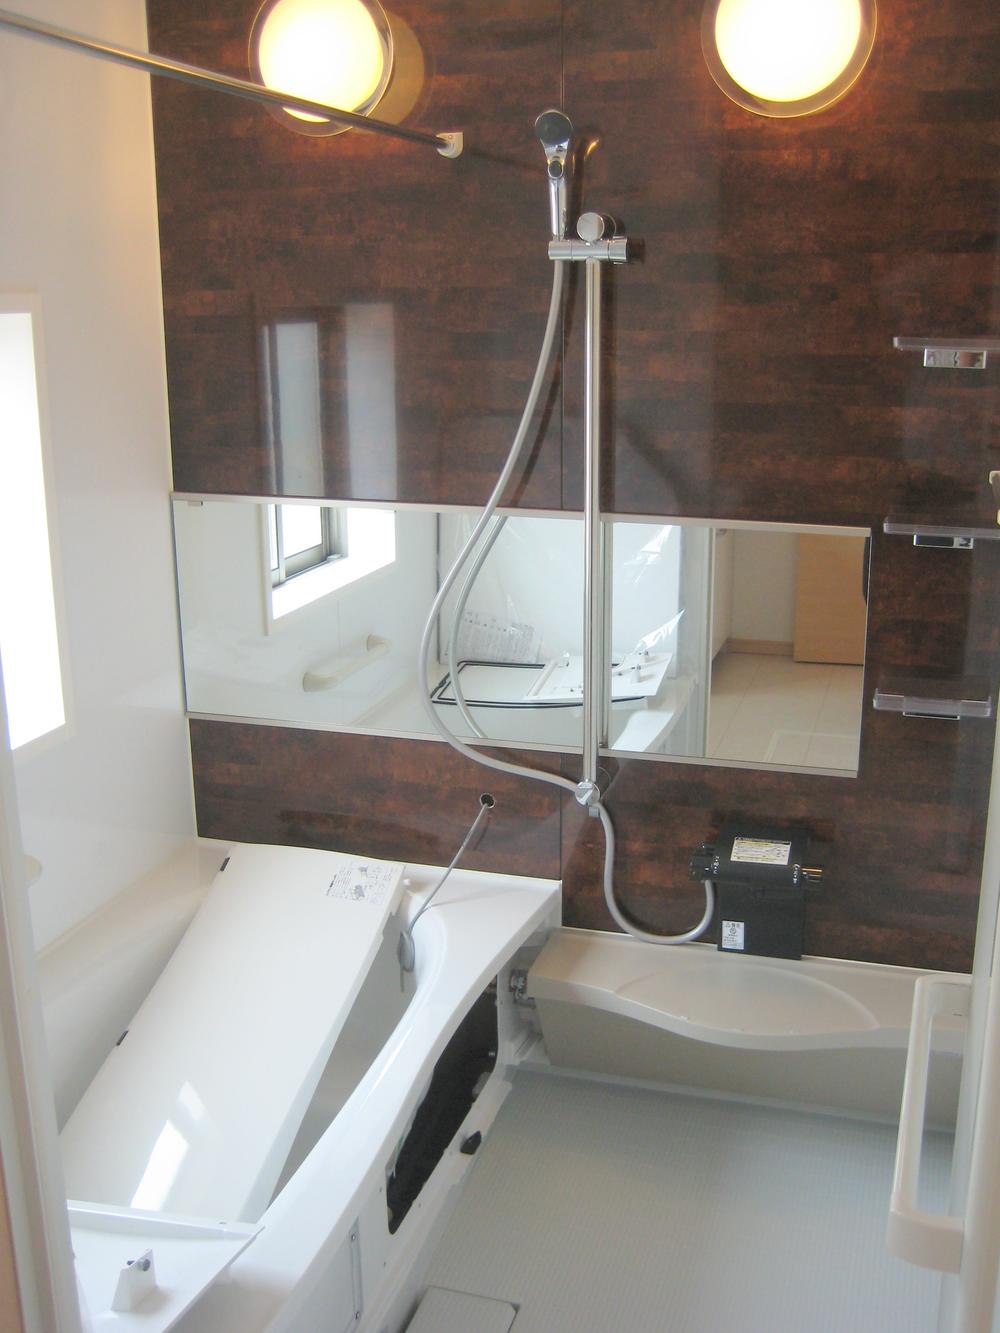 Same specifications photo (bathroom). (3 Building) same specification